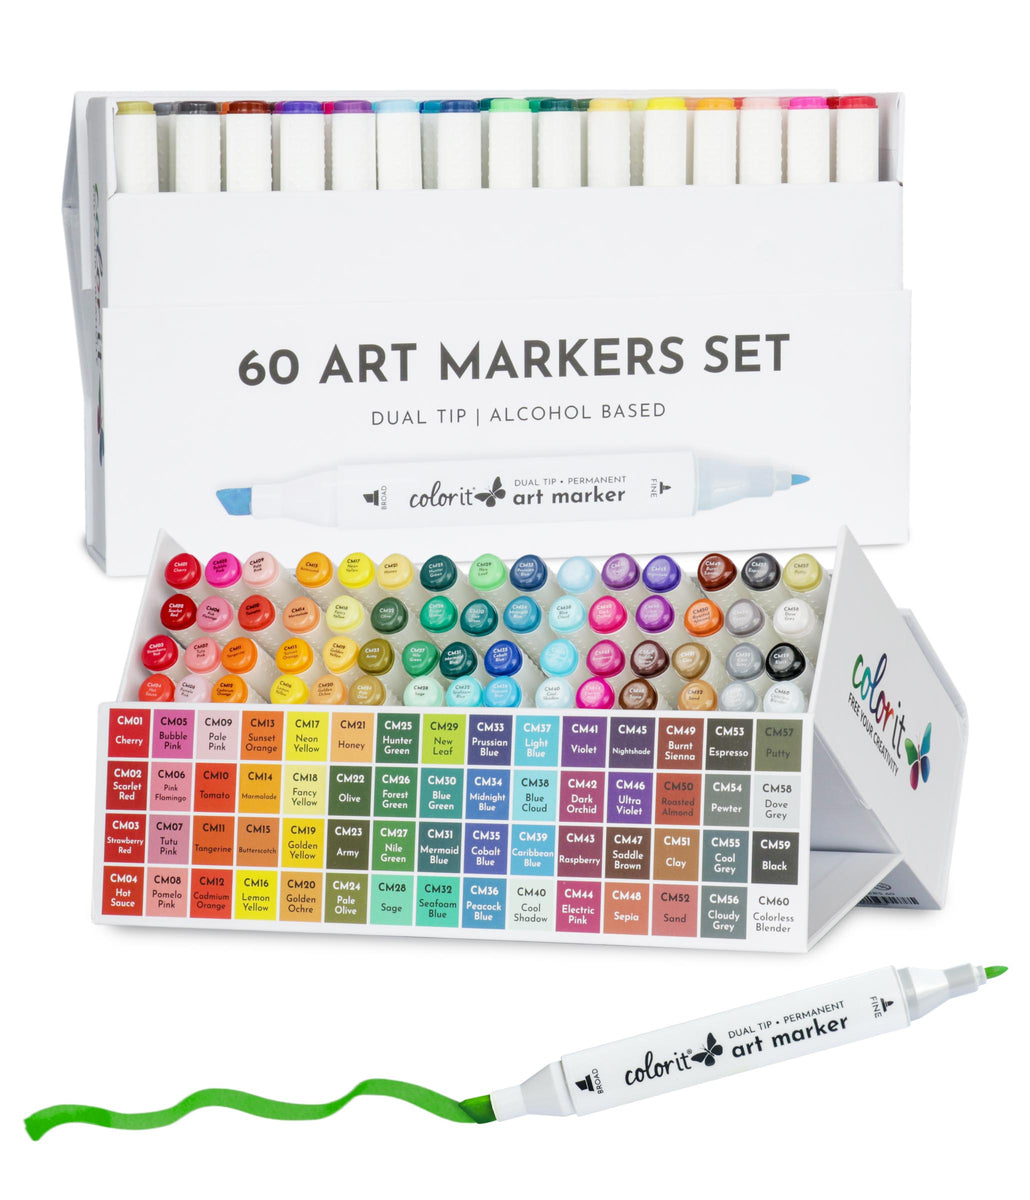 ColorIt Holiday Gift Guide for Coloring Lovers - 2020 Edition